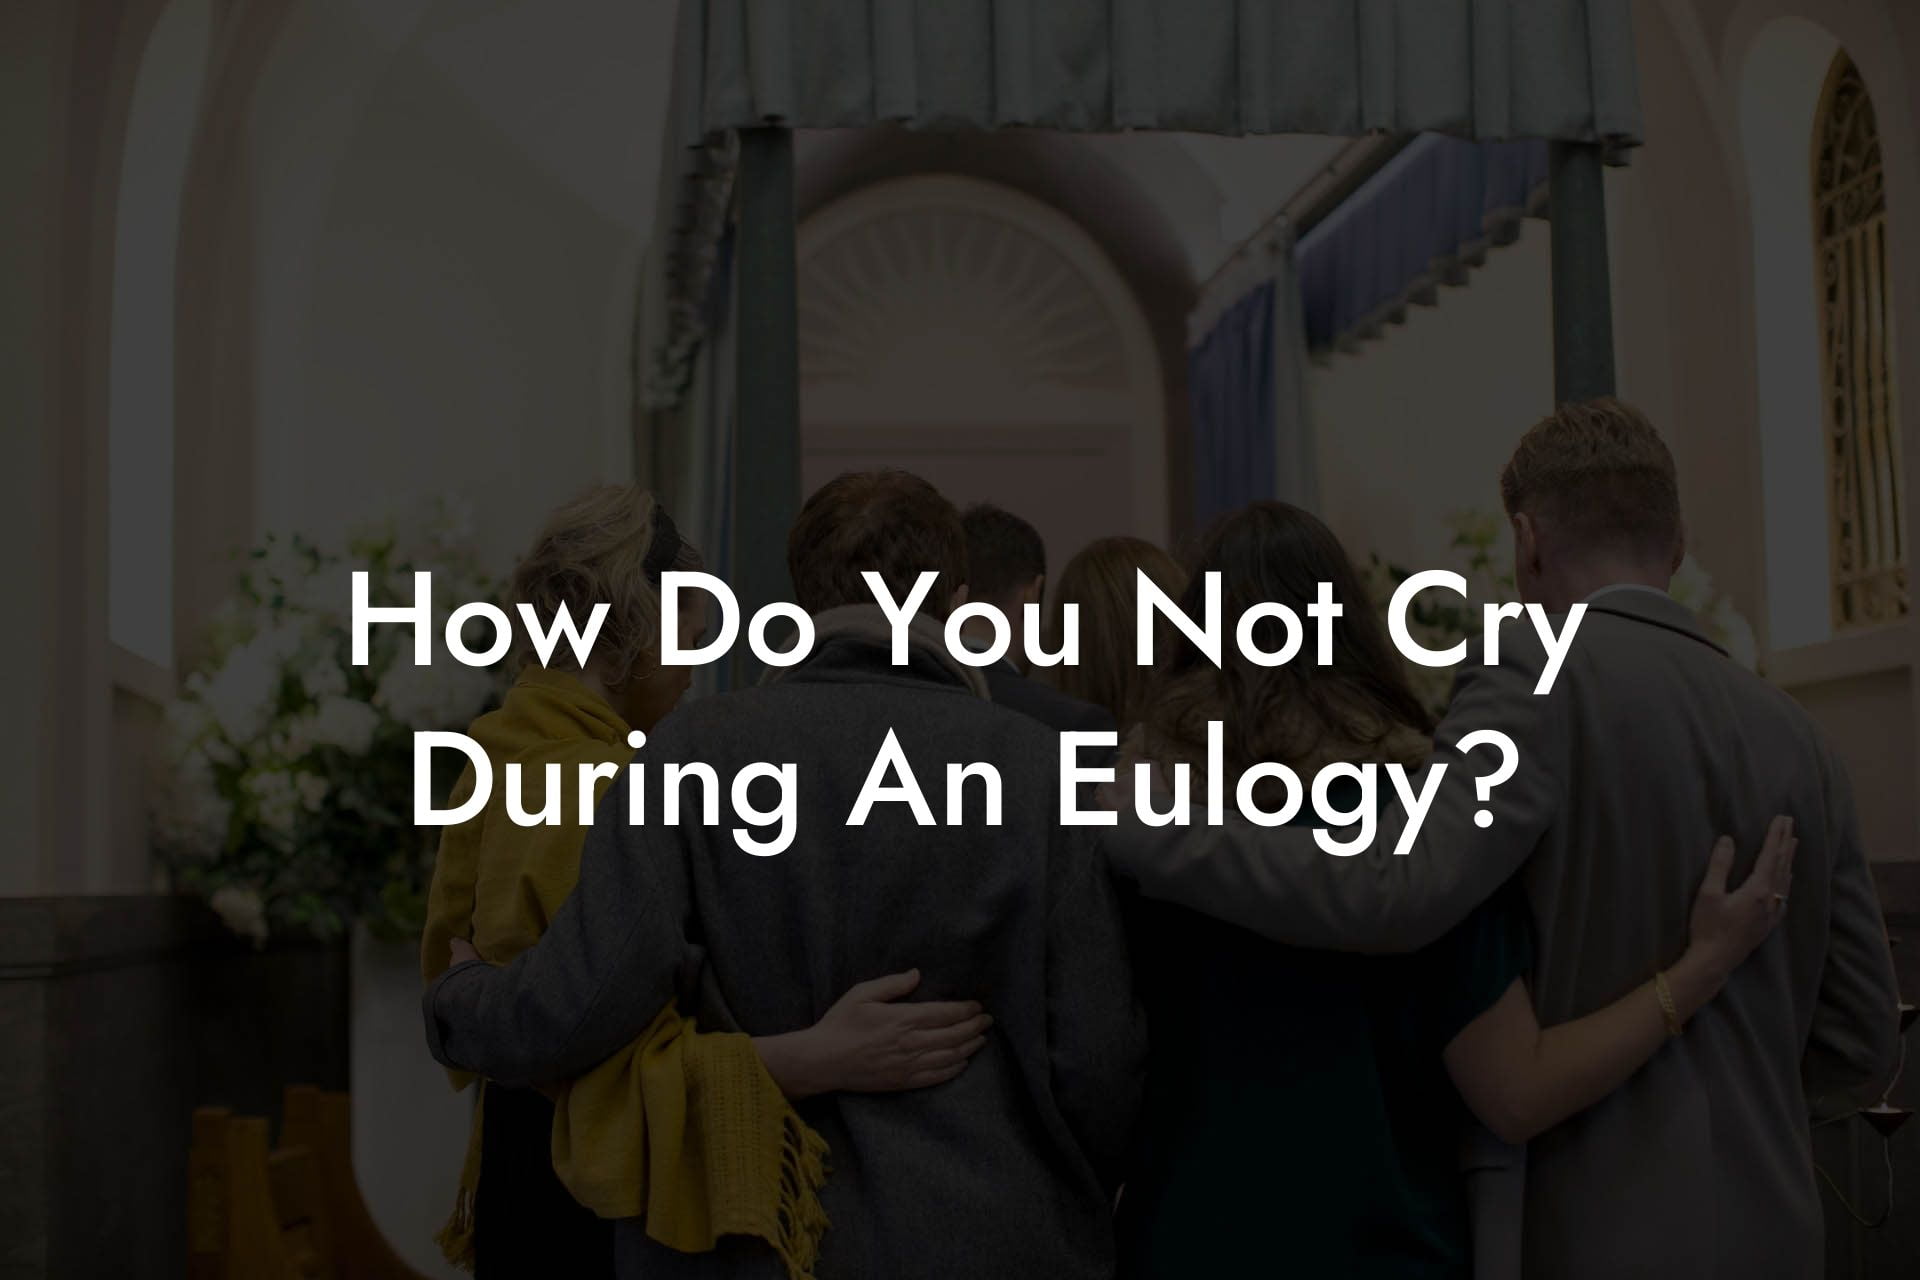 How Do You Not Cry During An Eulogy?